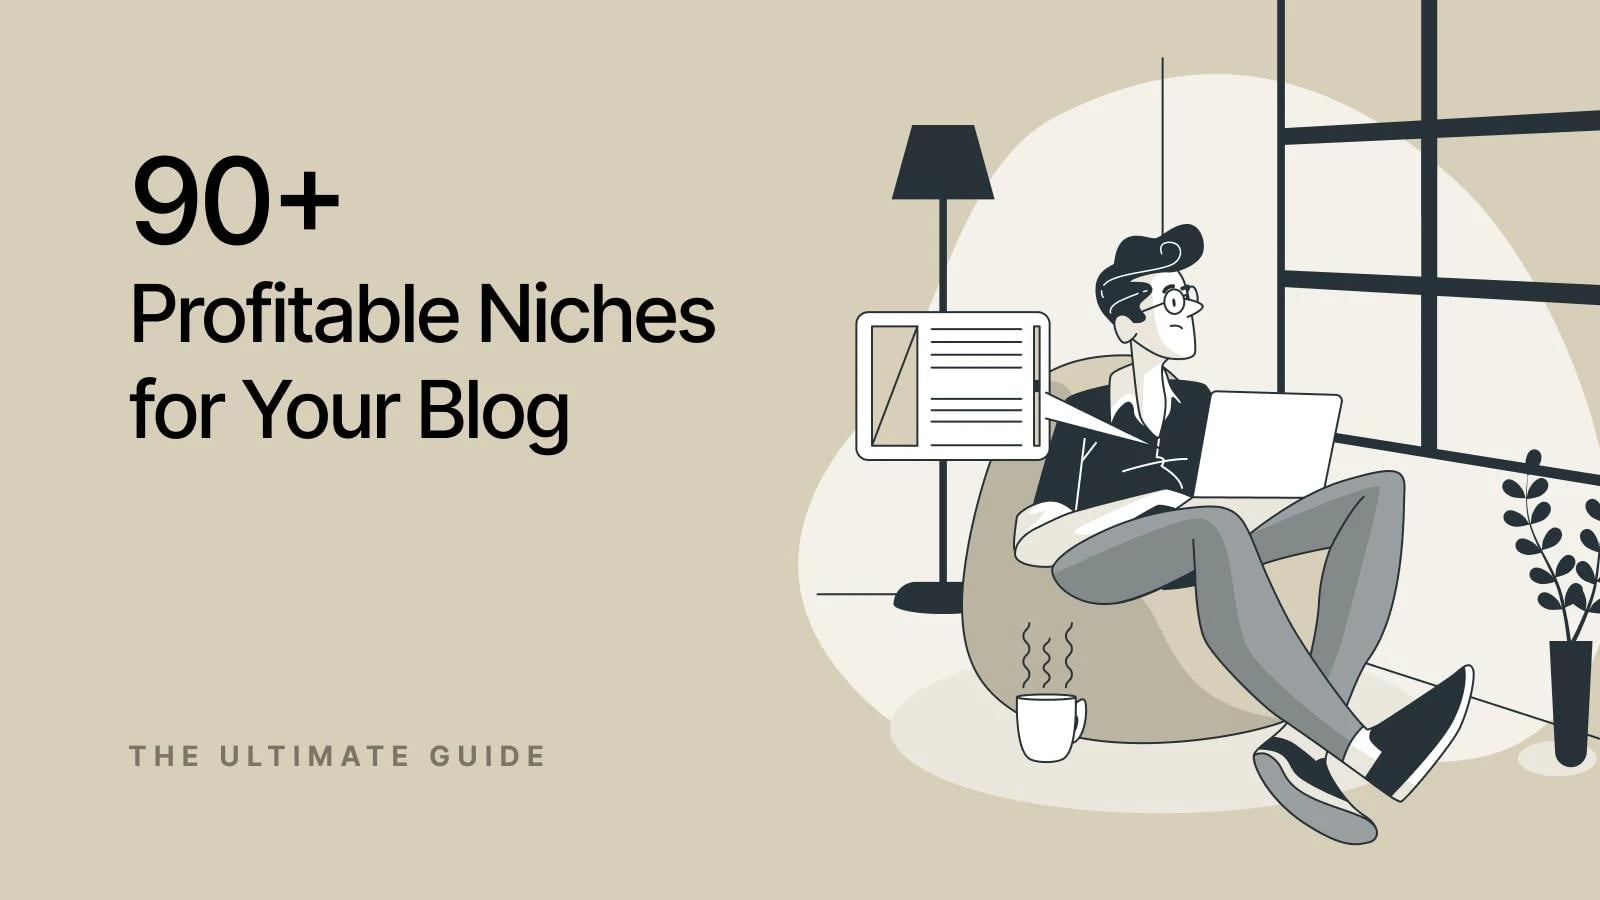 How to Find a Niche for Your Blog